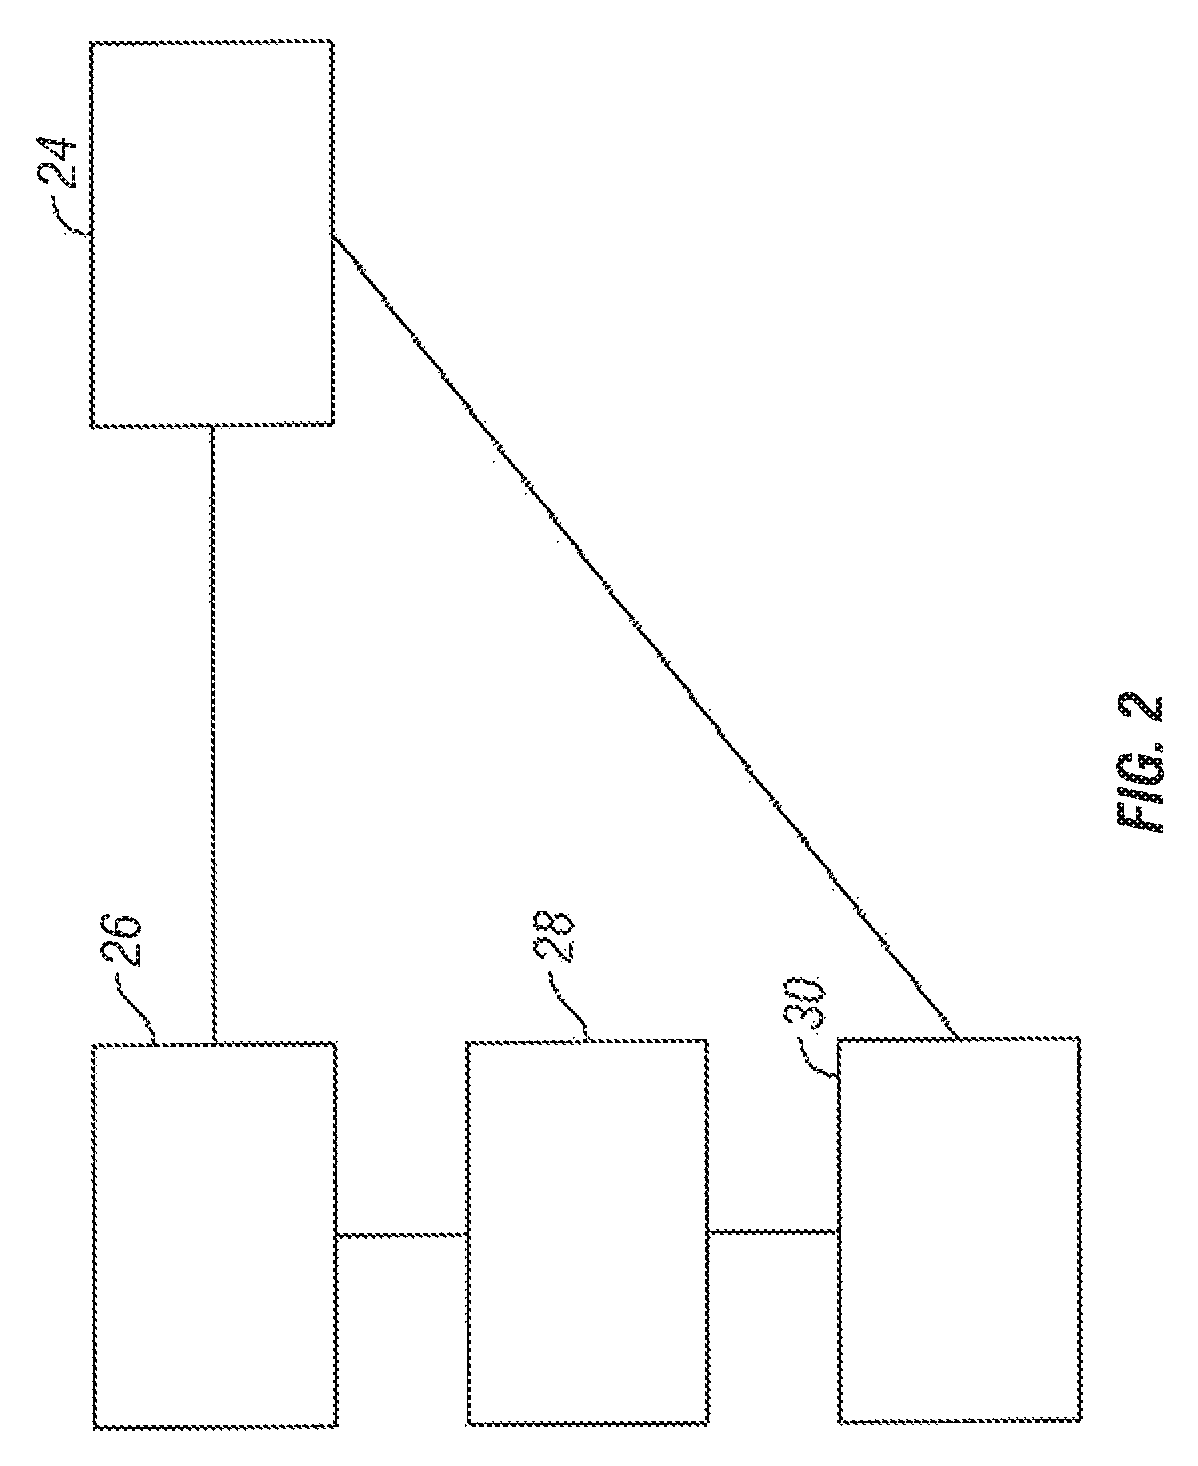 User monitoring device configured to be in communication with an emergency response system or team